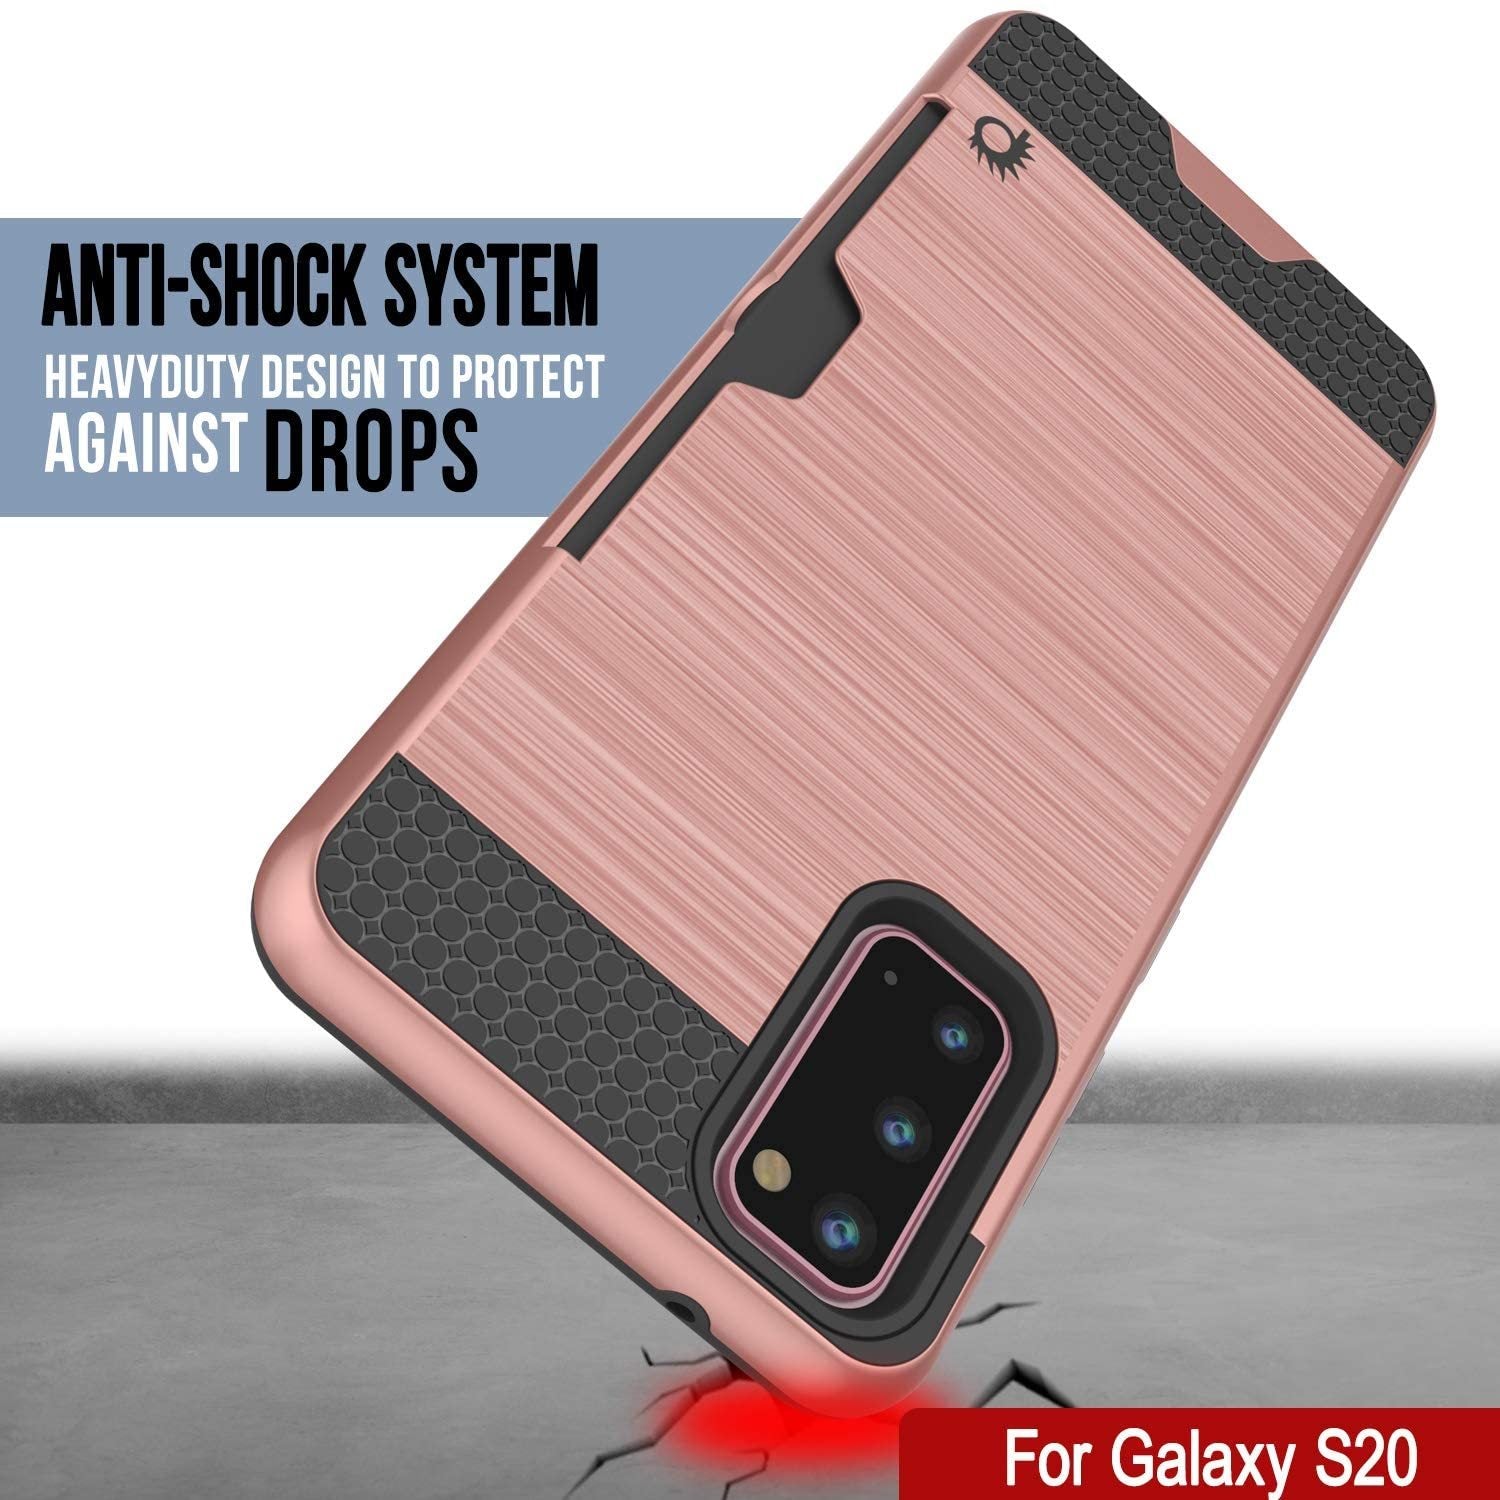 Galaxy S20 Case, PUNKcase [SLOT Series] [Slim Fit] Dual-Layer Armor Cover w/Integrated Anti-Shock System, Credit Card Slot [Rose Gold]